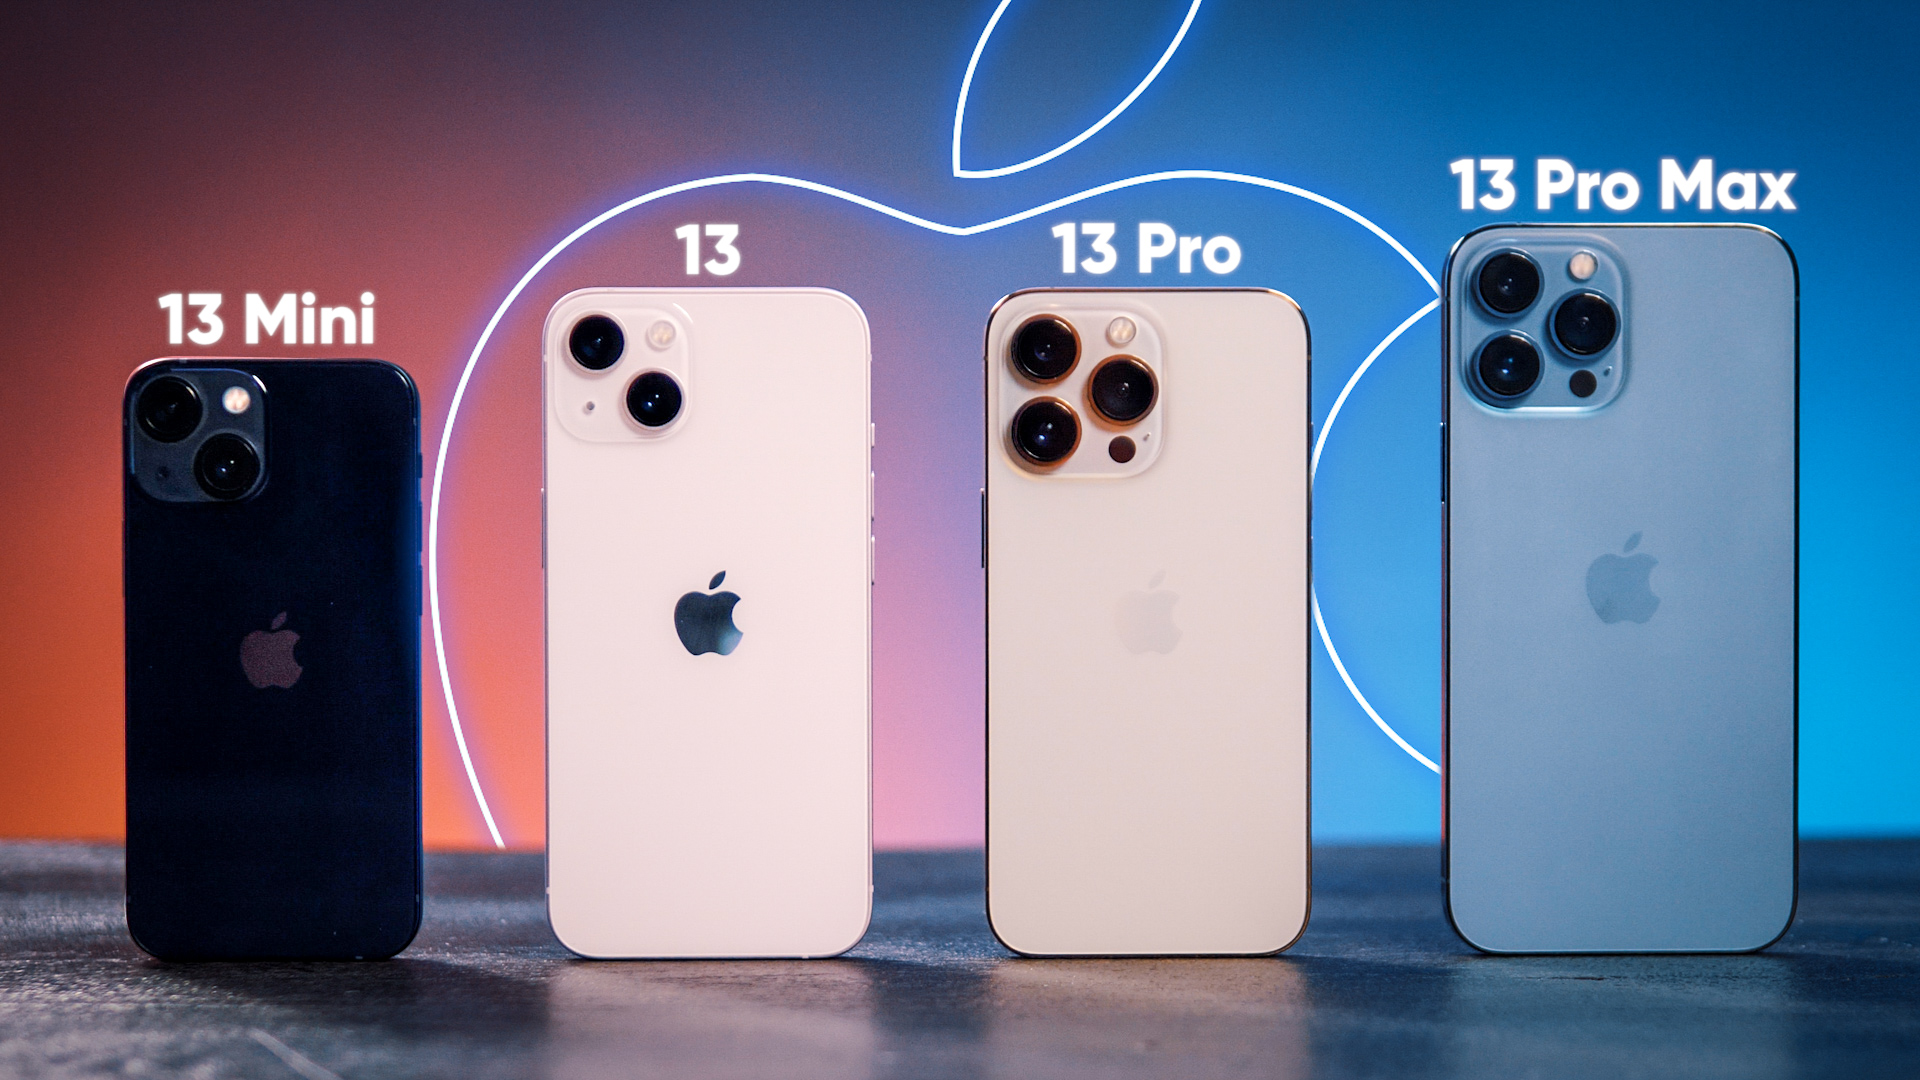 On a reçu TOUS LES iPHONE 13 (iPhone 13, iPhone 13 Mini, iPhone 13 Pro, iPhone 13 Pro Max)